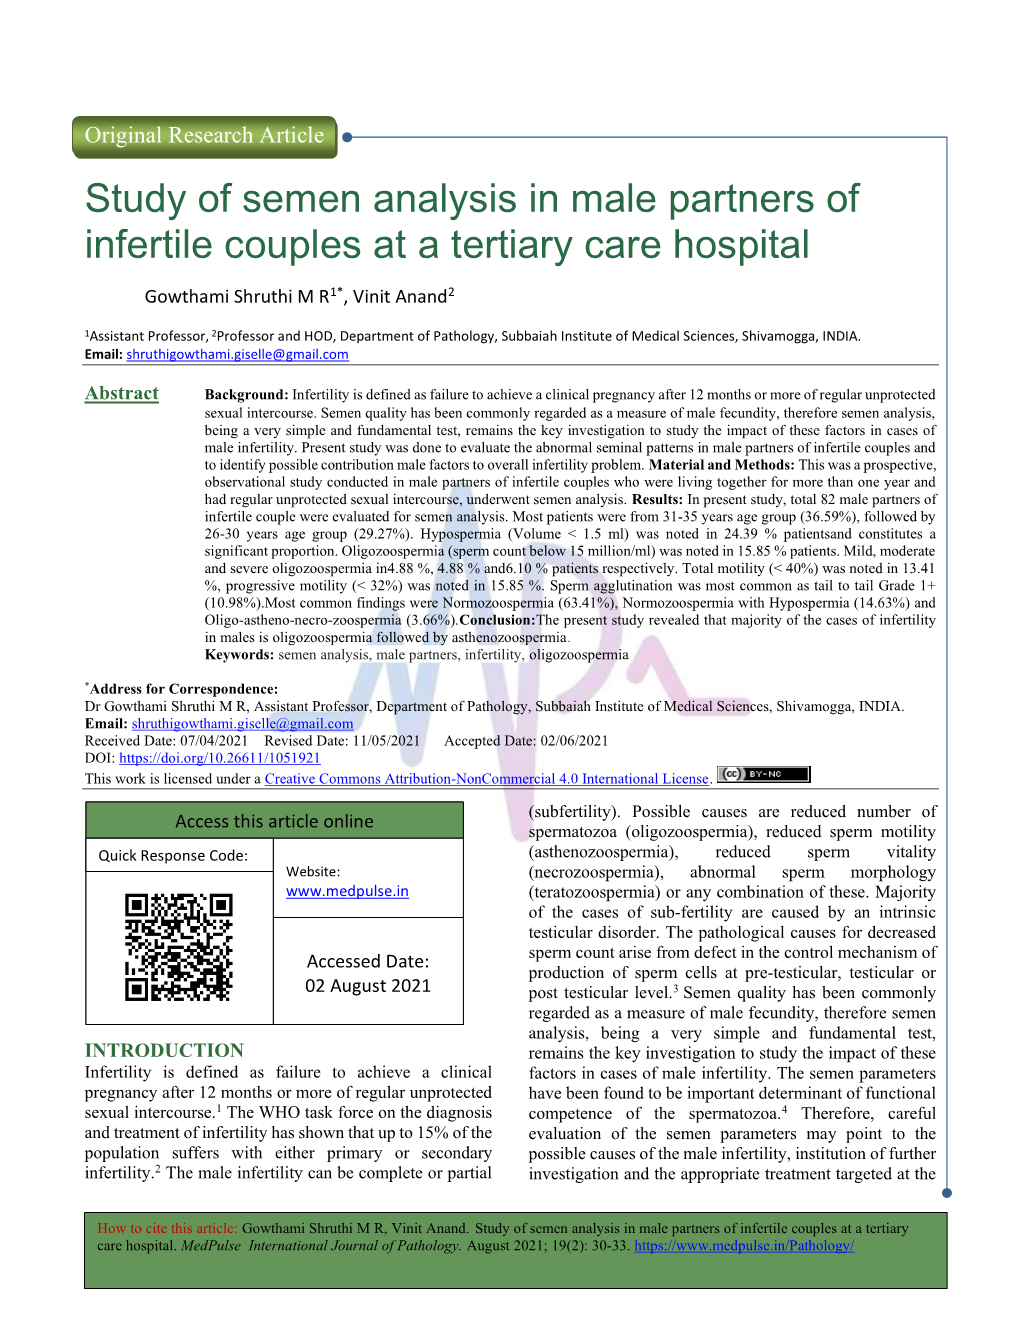 Study of Semen Analysis in Male Partners of Infertile Couples at a Tertiary Care Hospital